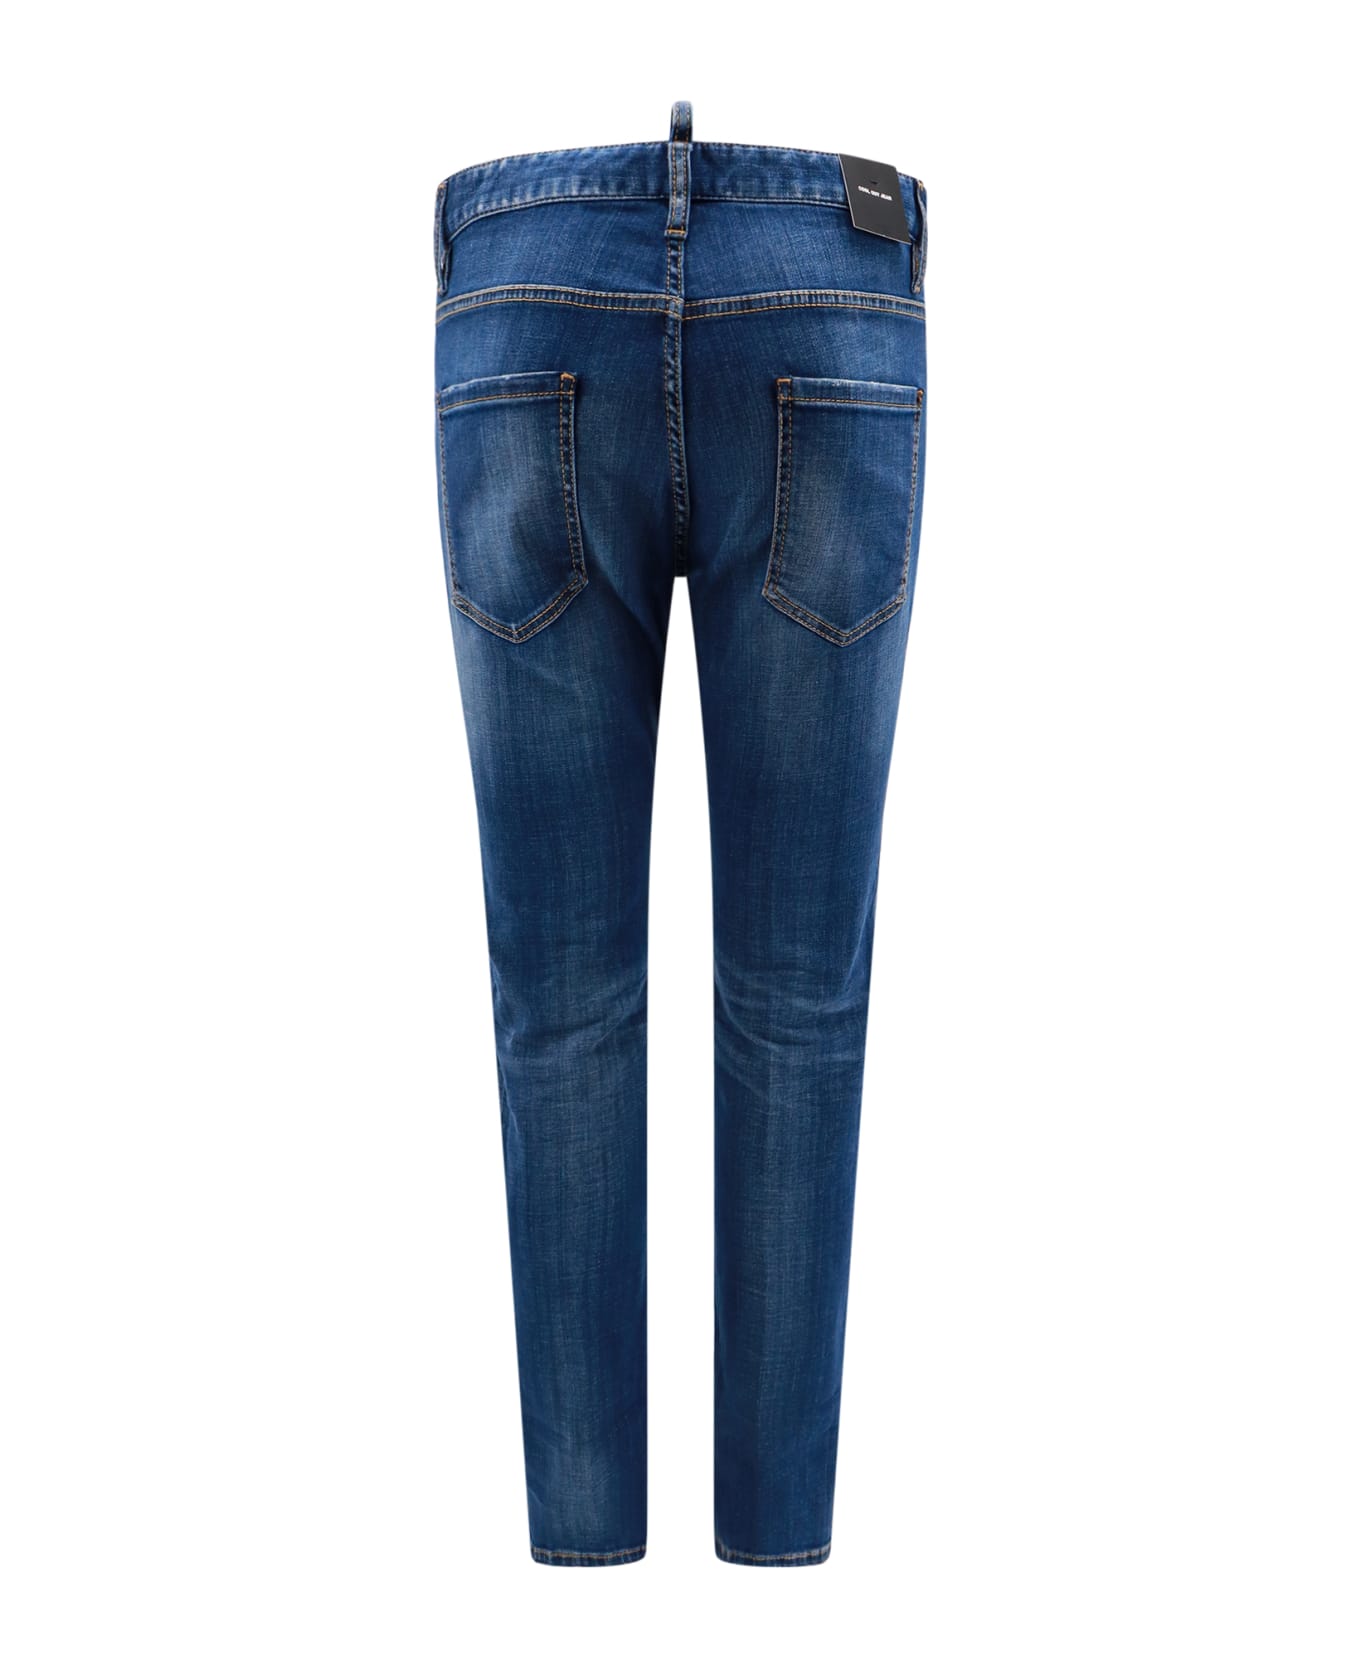 Dsquared2 Cool Guy Jeans - Blue デニム